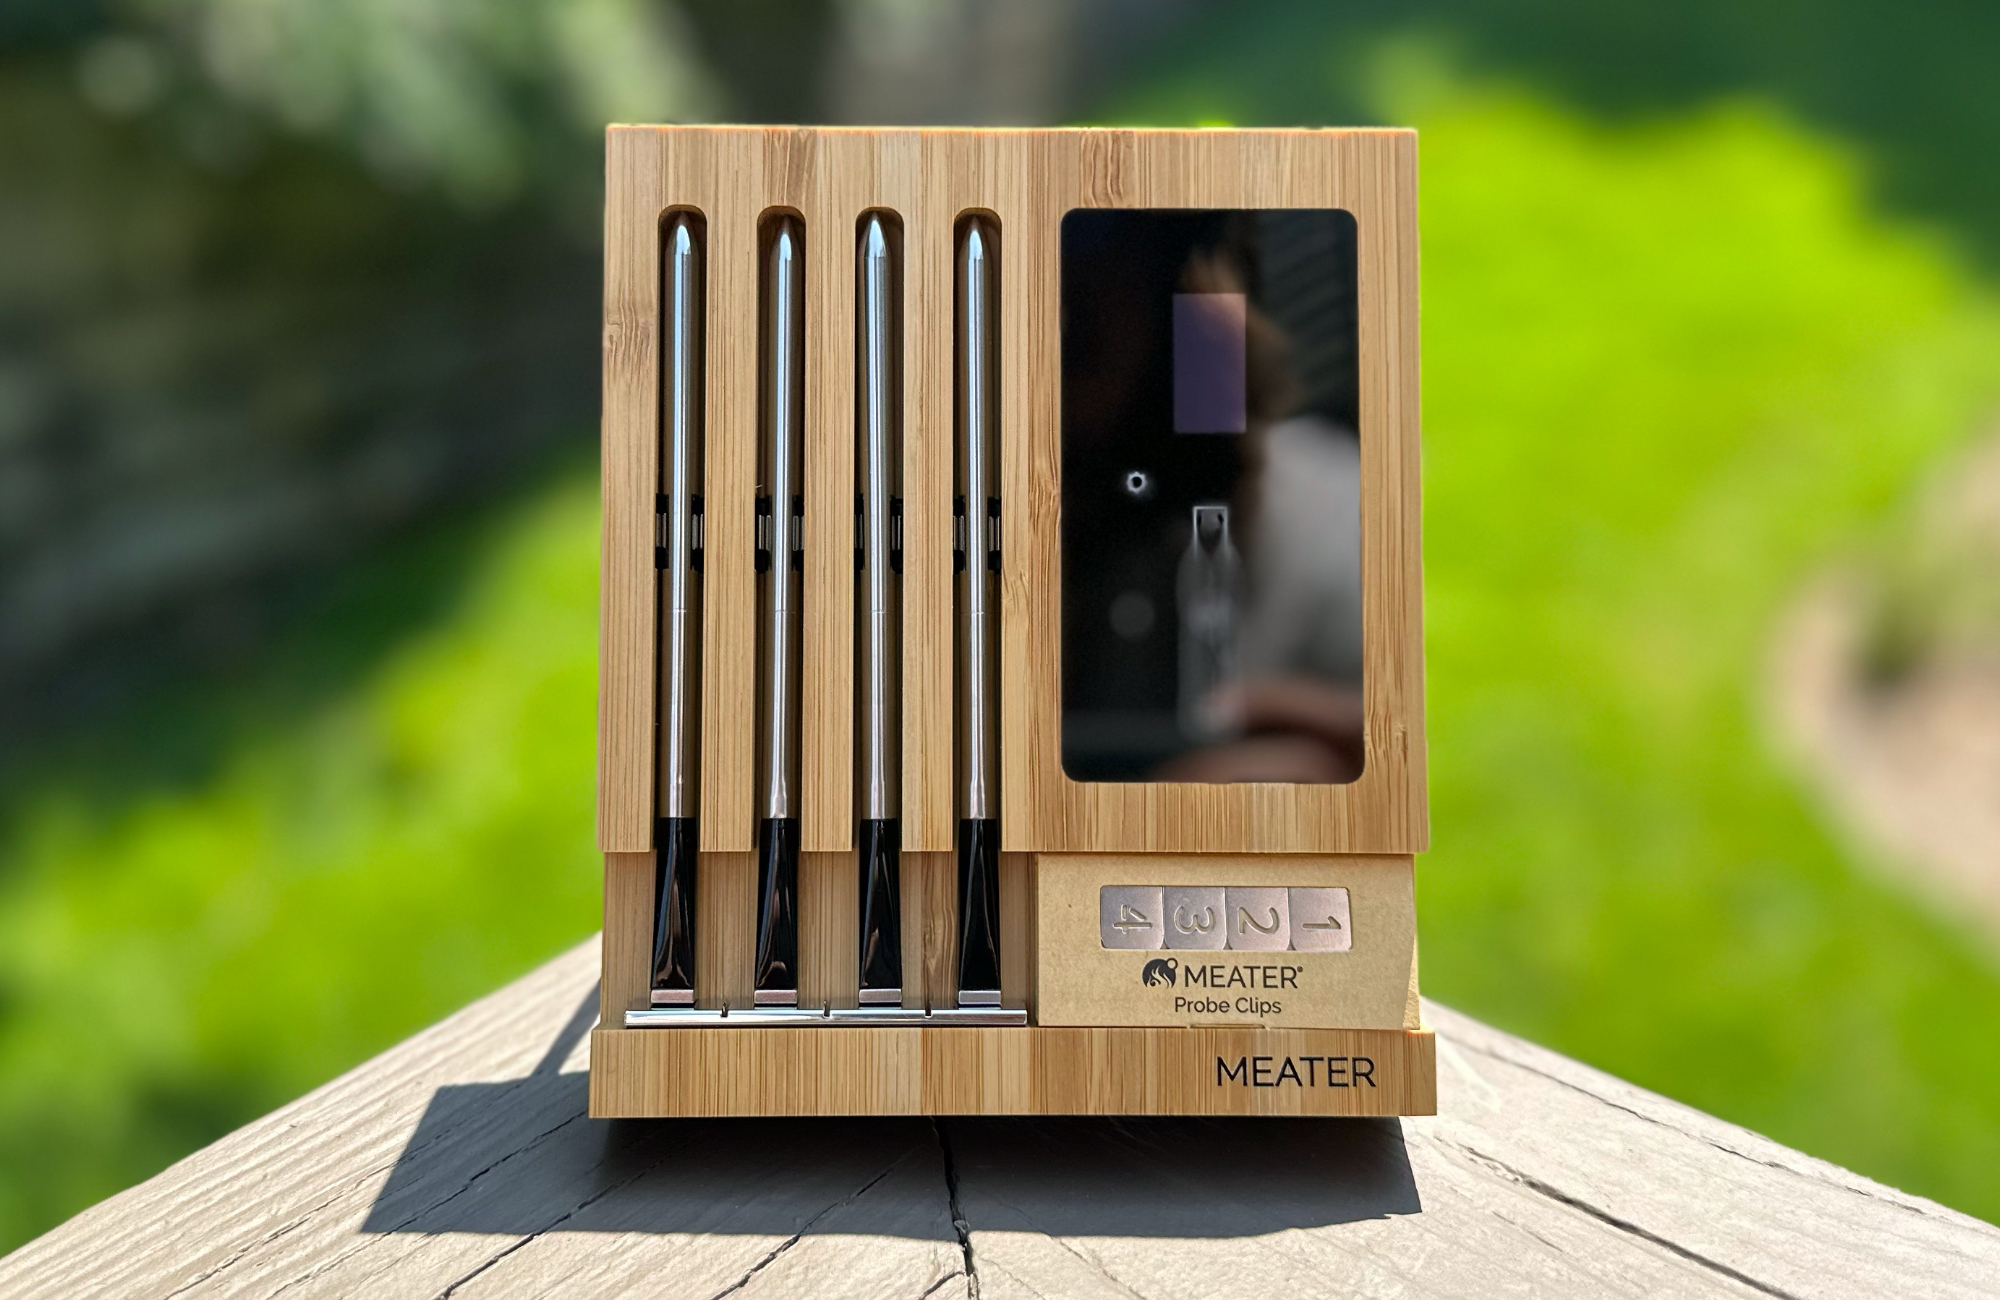 The MEATER Smart Wireless Meat Thermometer is a Big Deal this  Prime  Day – Save 25%